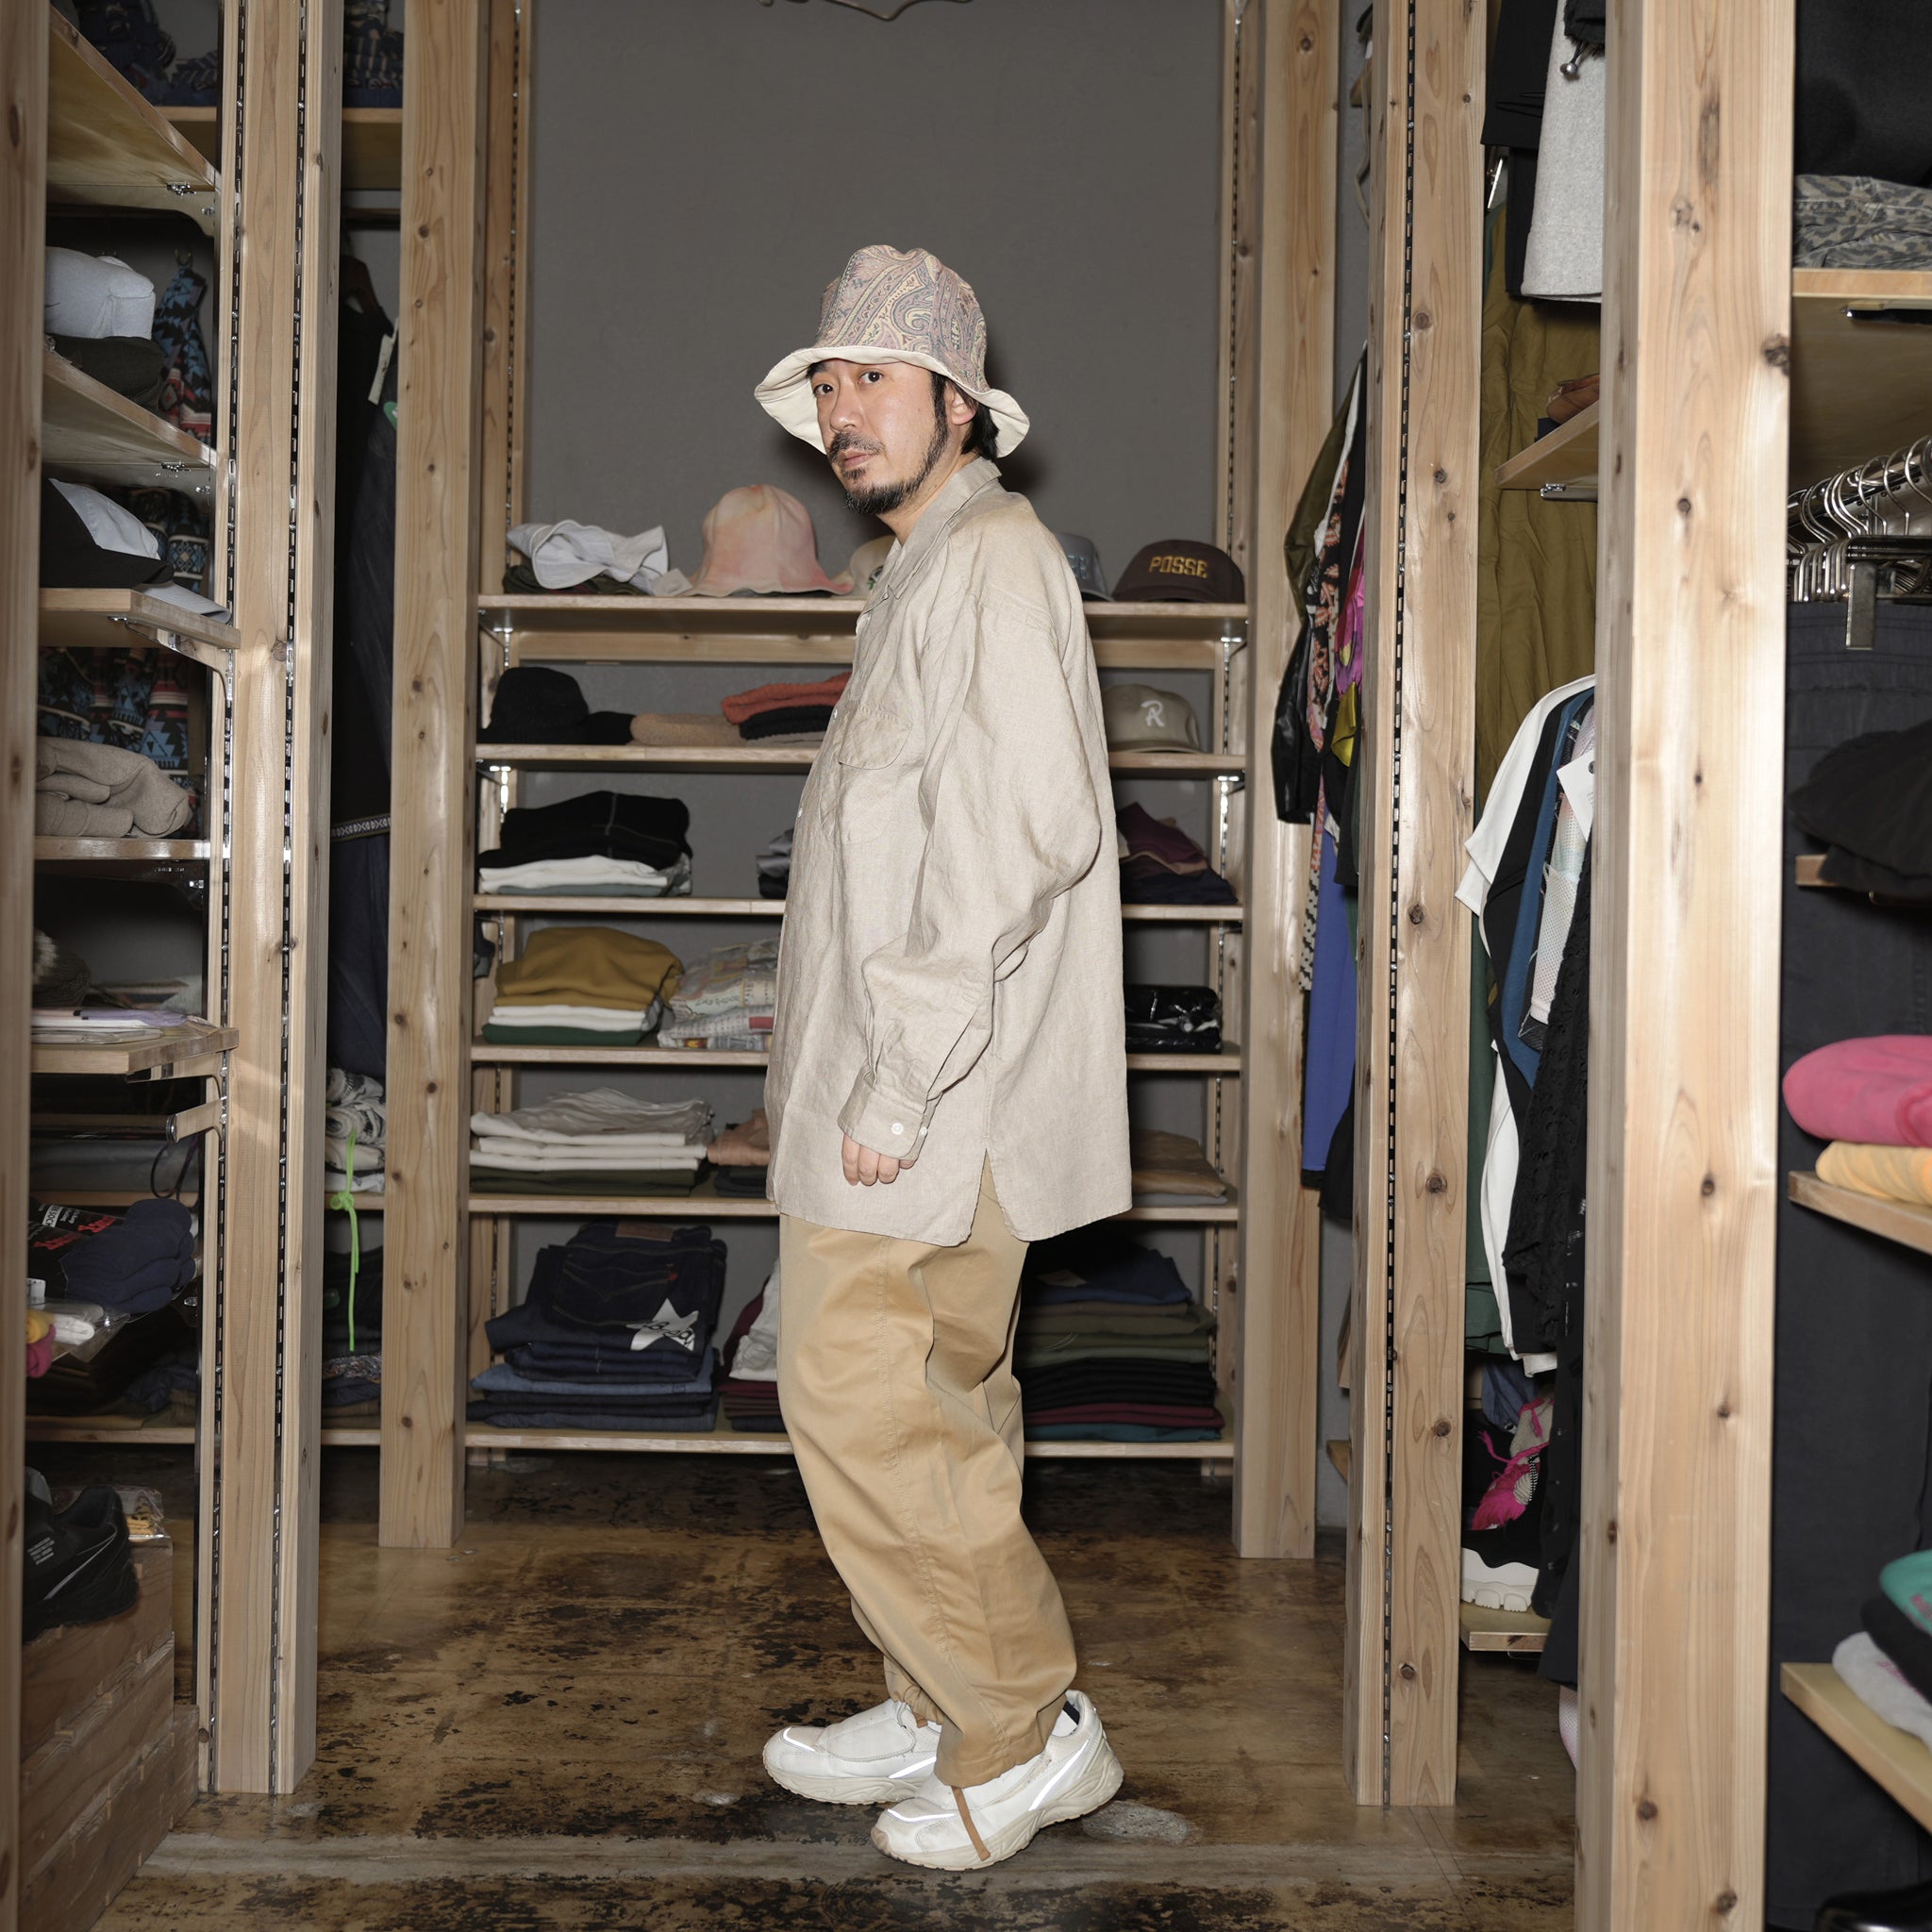 Name:1951 BAKER | Color:IRIDESCENT BEIGE | Size:M/L【CITYLIGHTS PRODUCTS_シティライツプロダクツ】